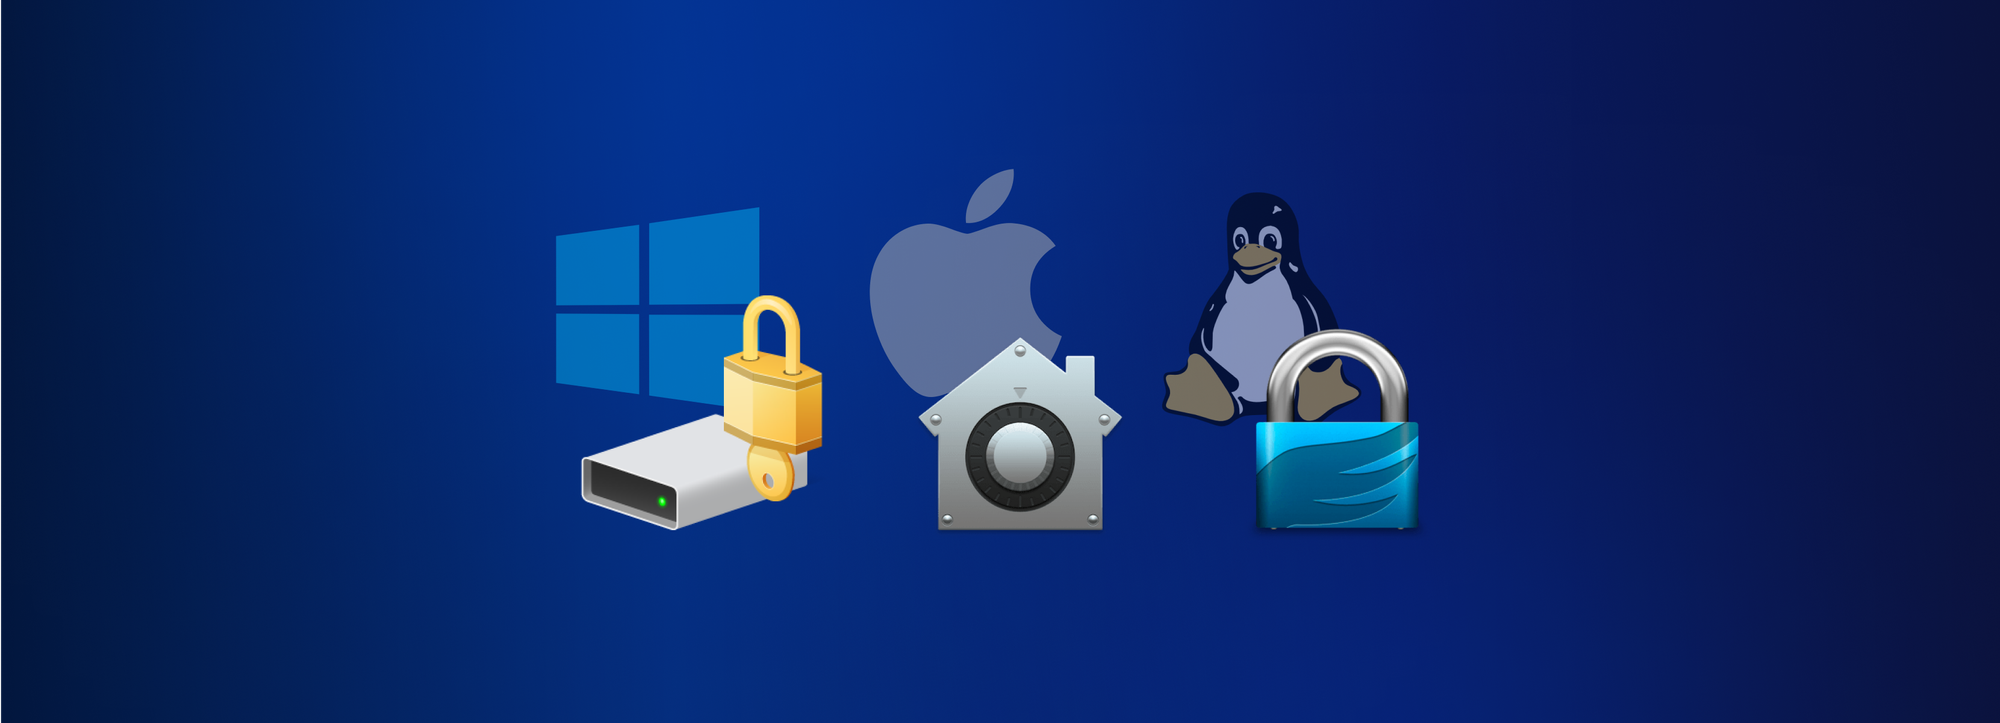 How to encrypt files: a step-by-step guide for Windows, Mac, and Linux users